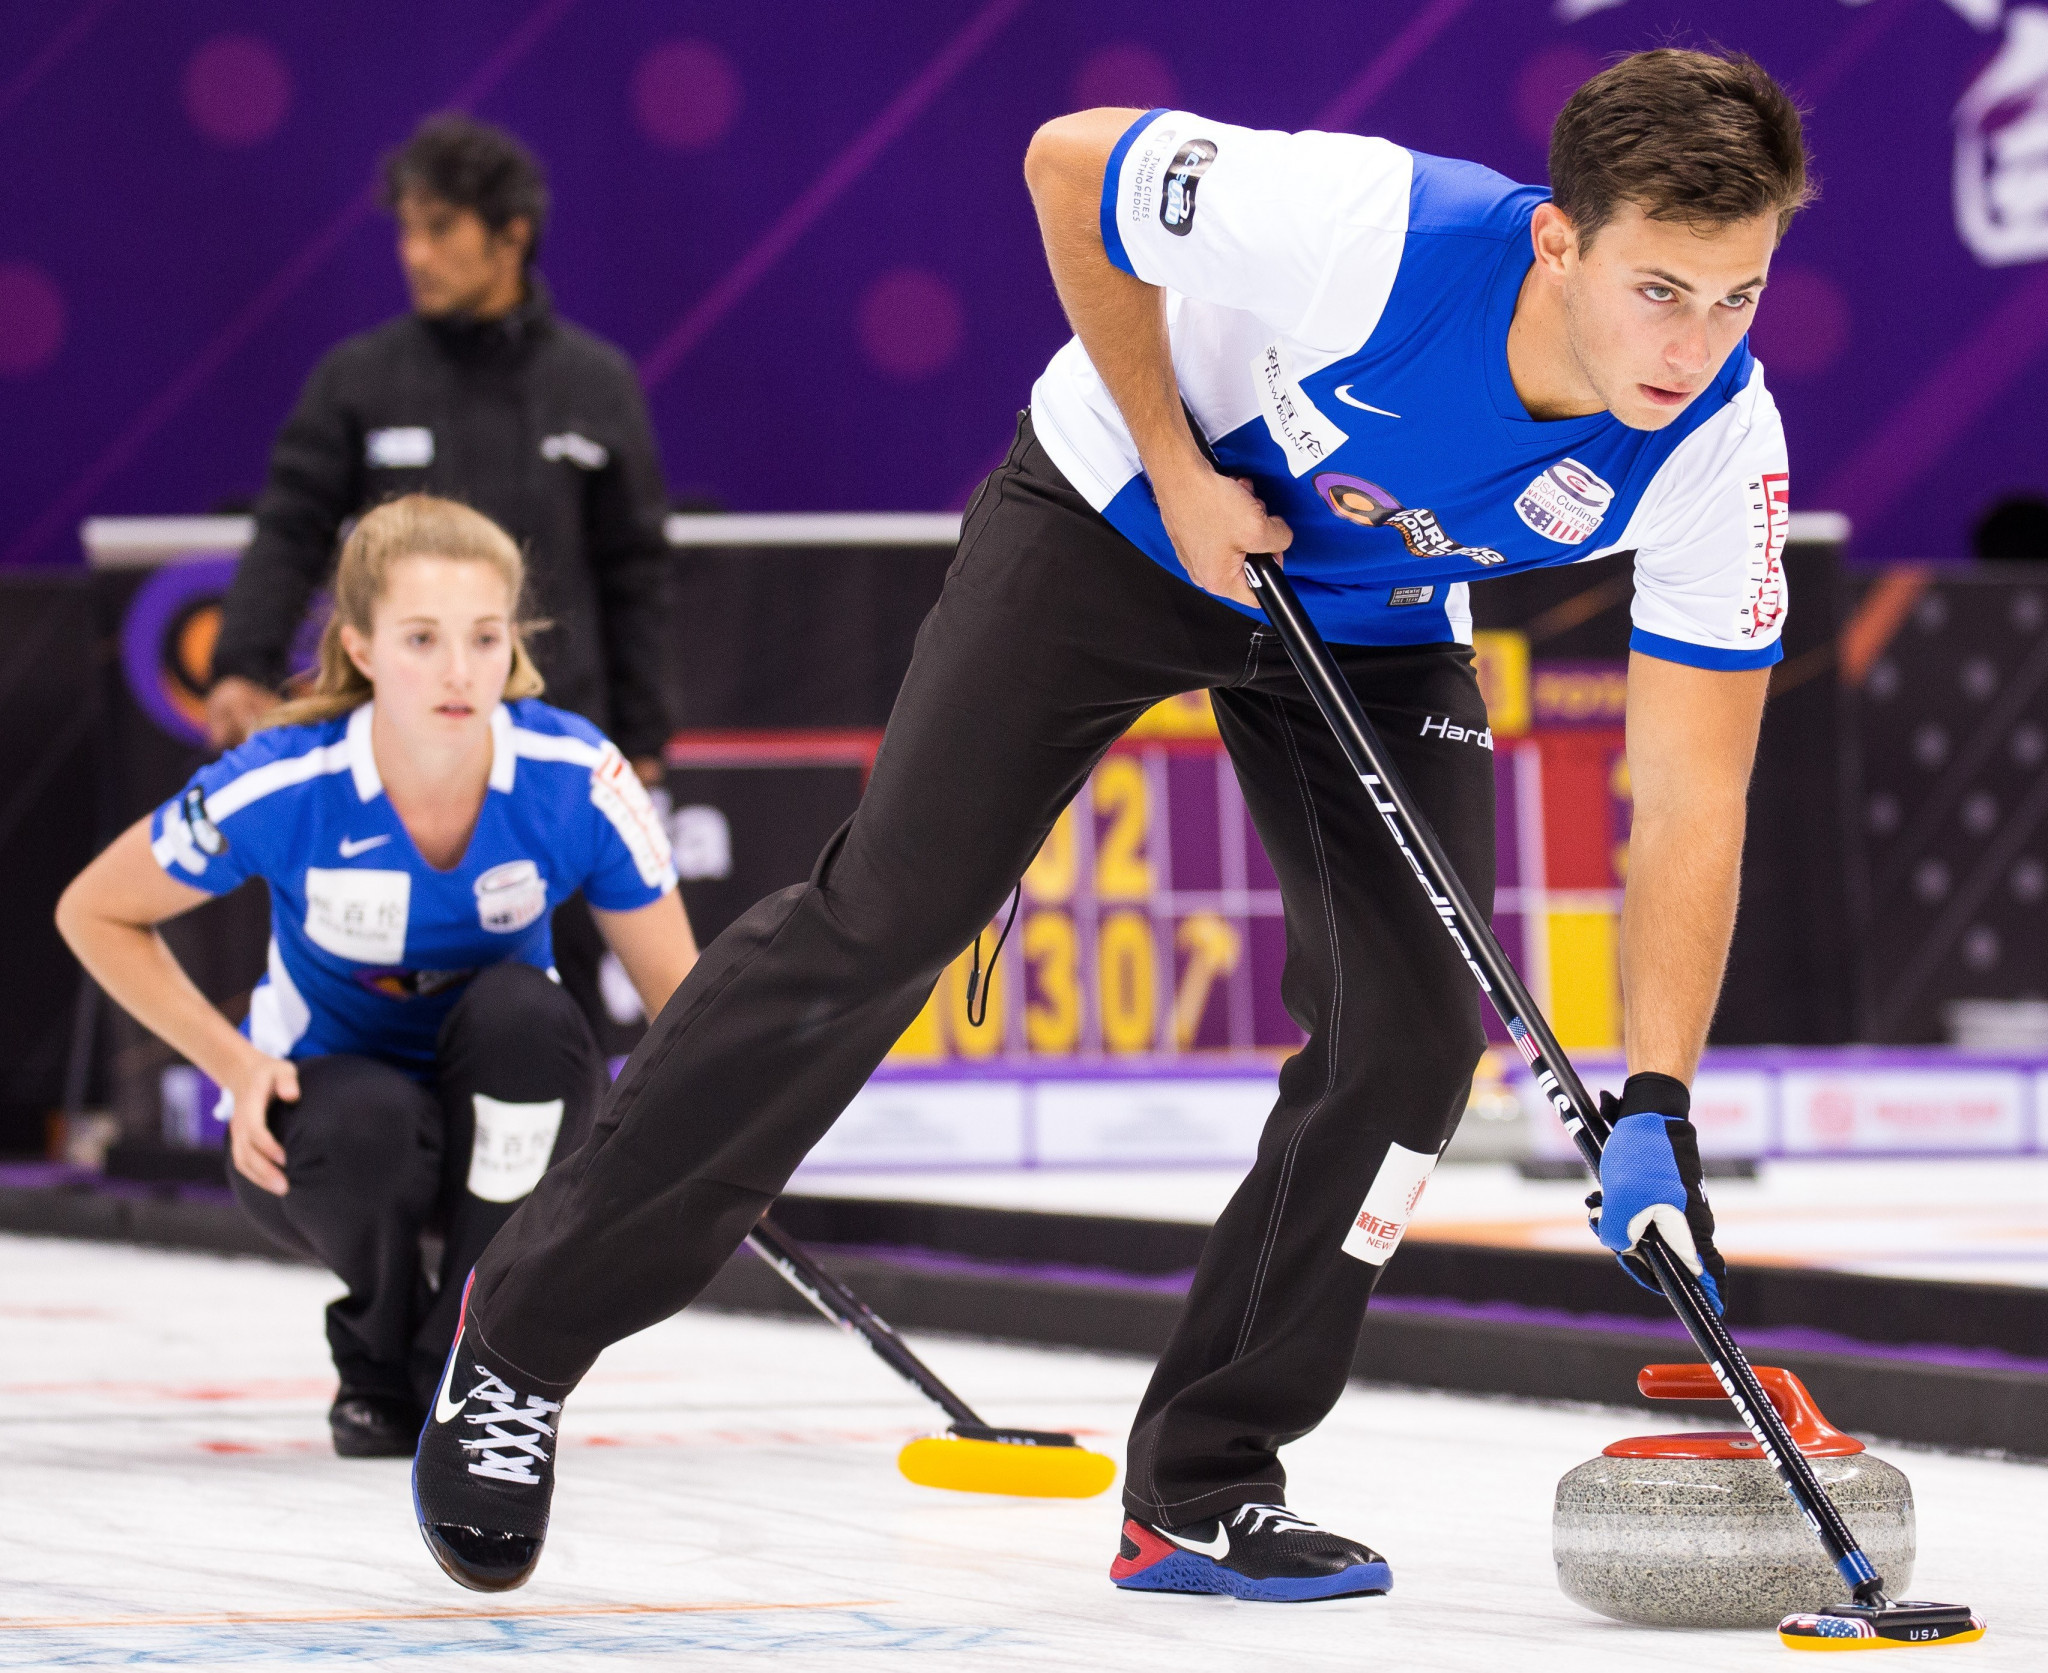 Sarah Anderson and Korey Dropkin of the US are undefeated in the mixed doubles ©WCF